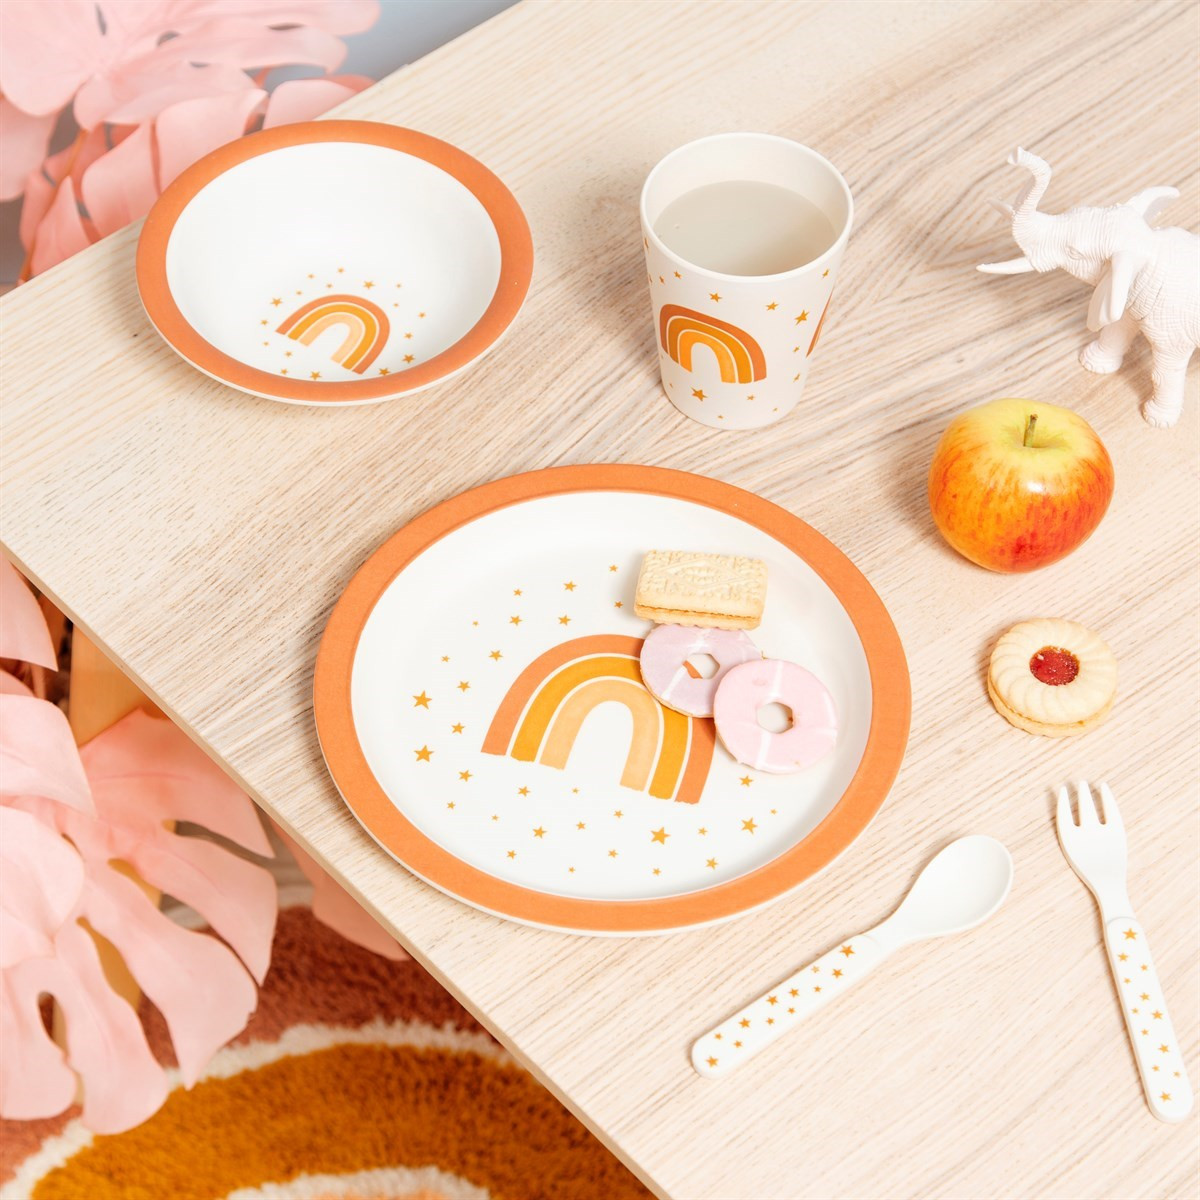 Sass & Belle Earth Rainbow Bamboo Tableware Set - Coral>